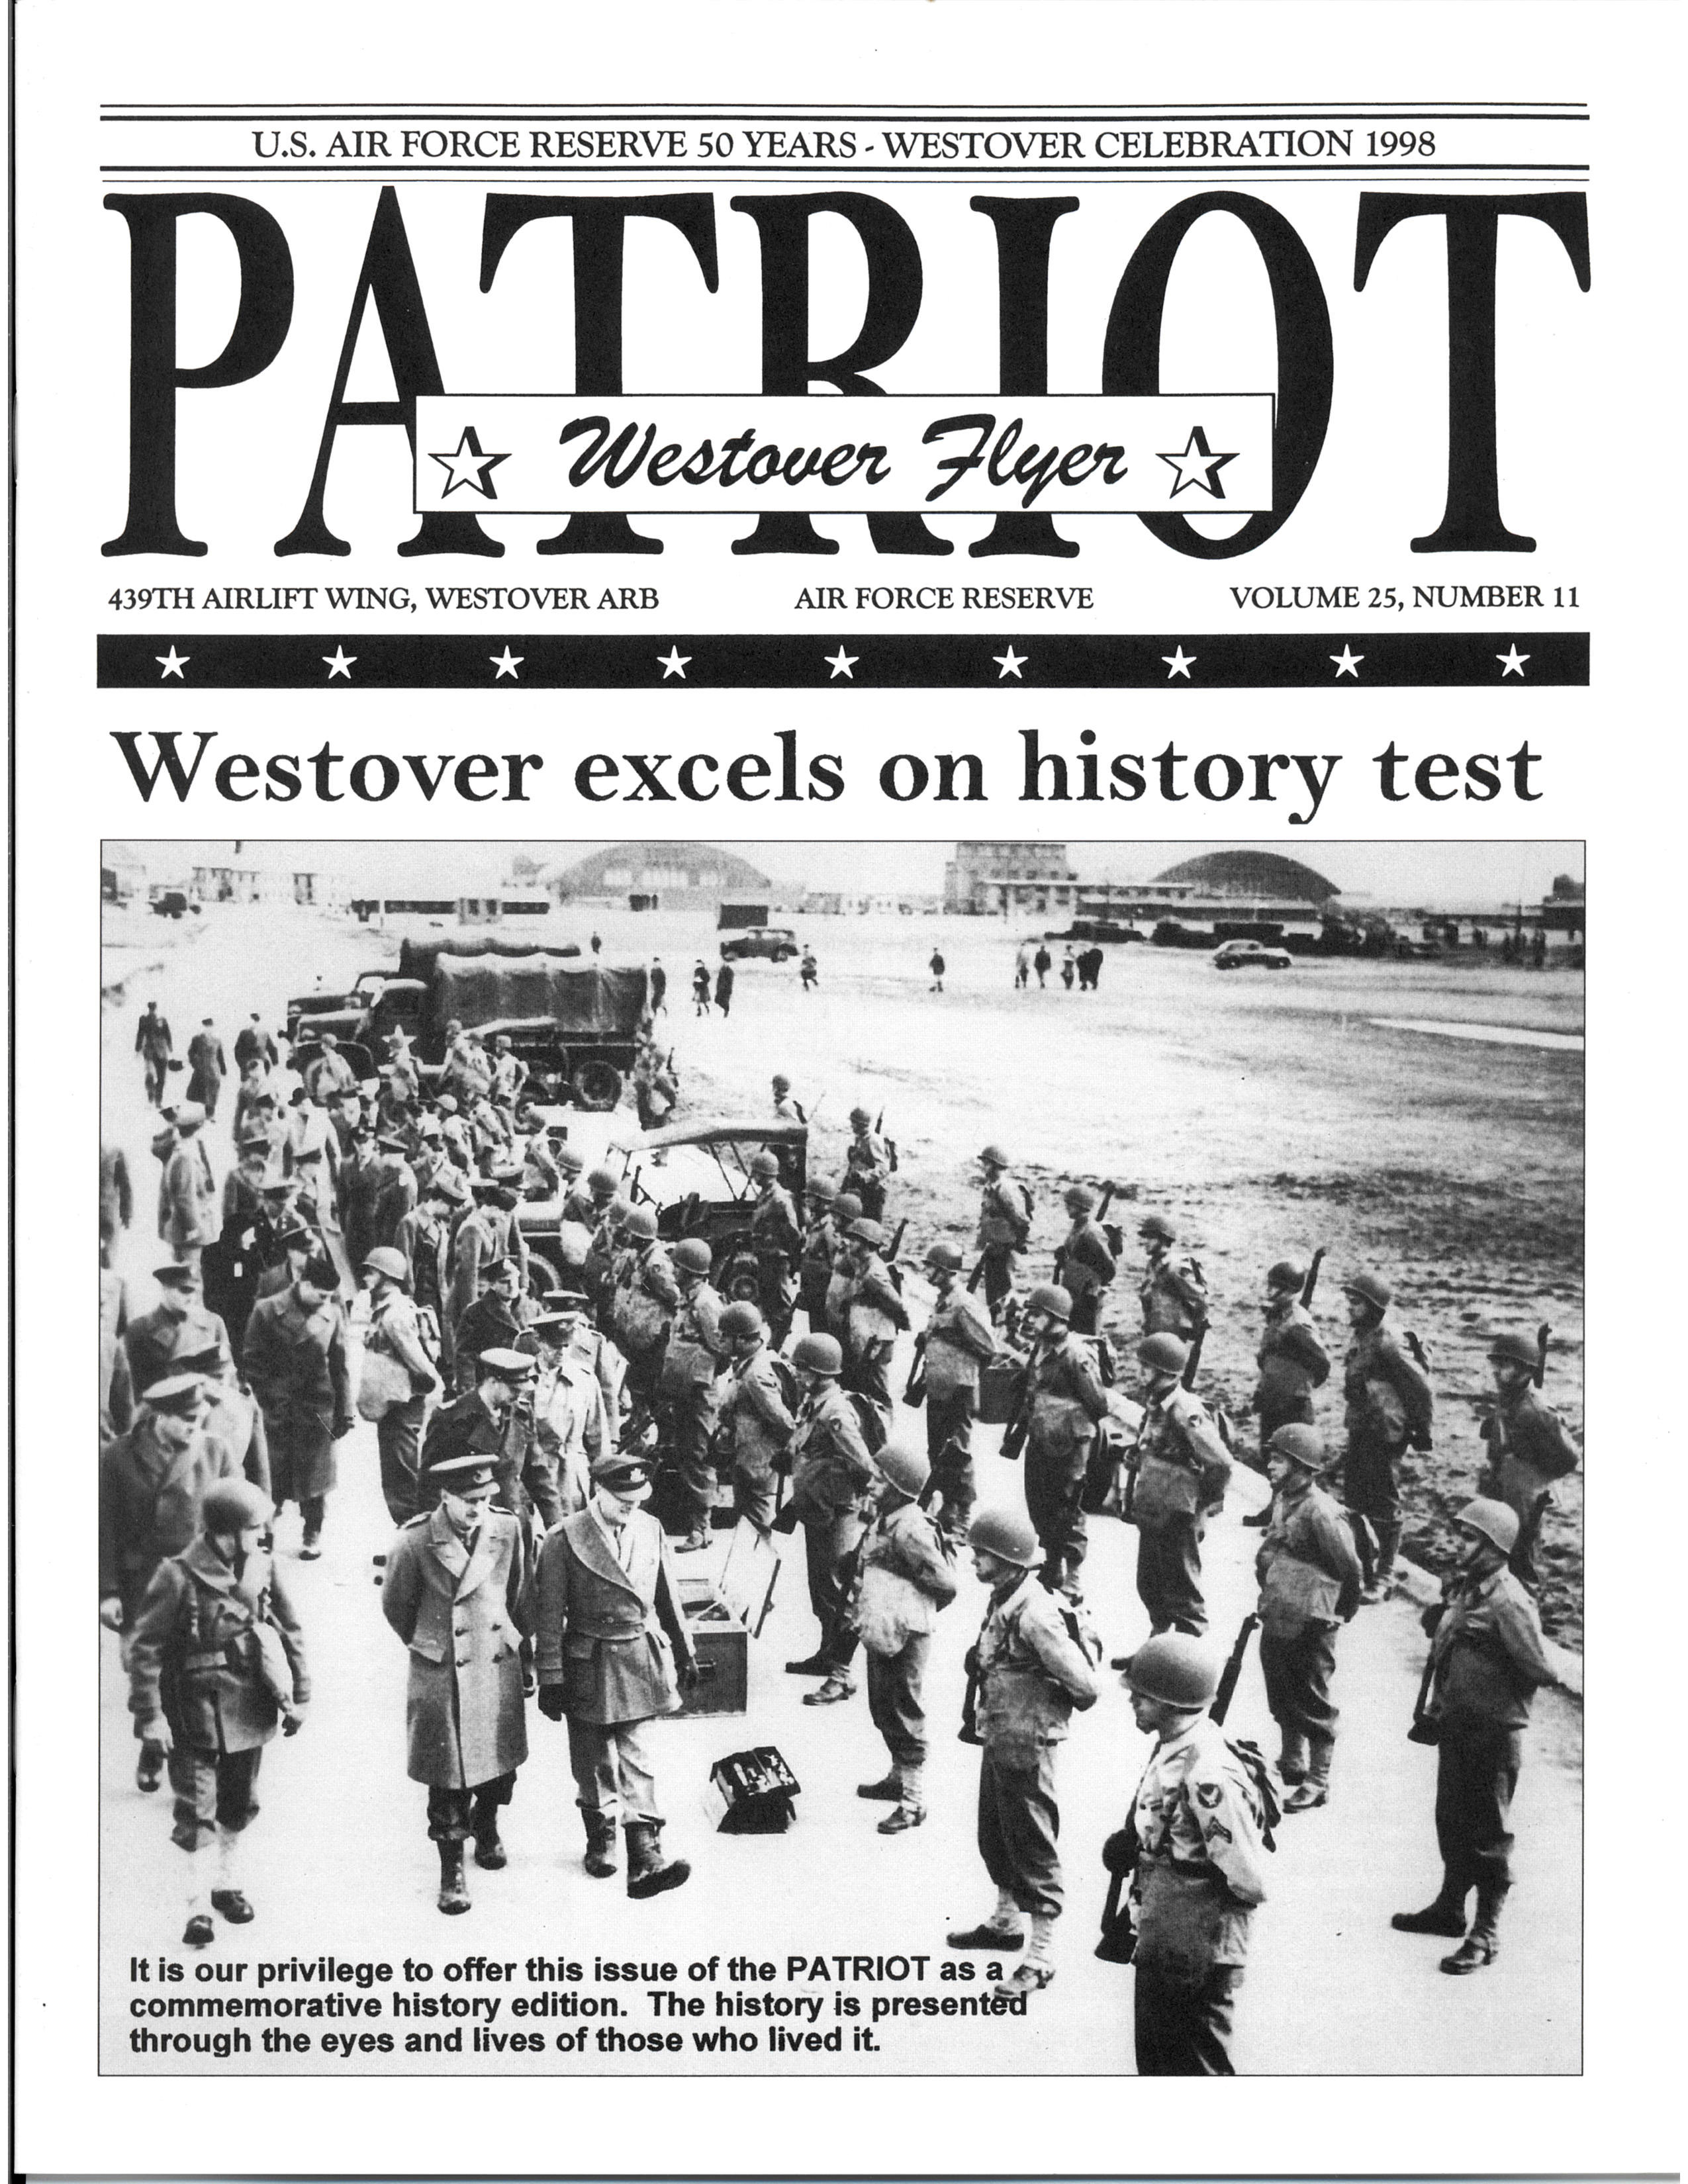 Historical 50 years Patriot Magazine Cover